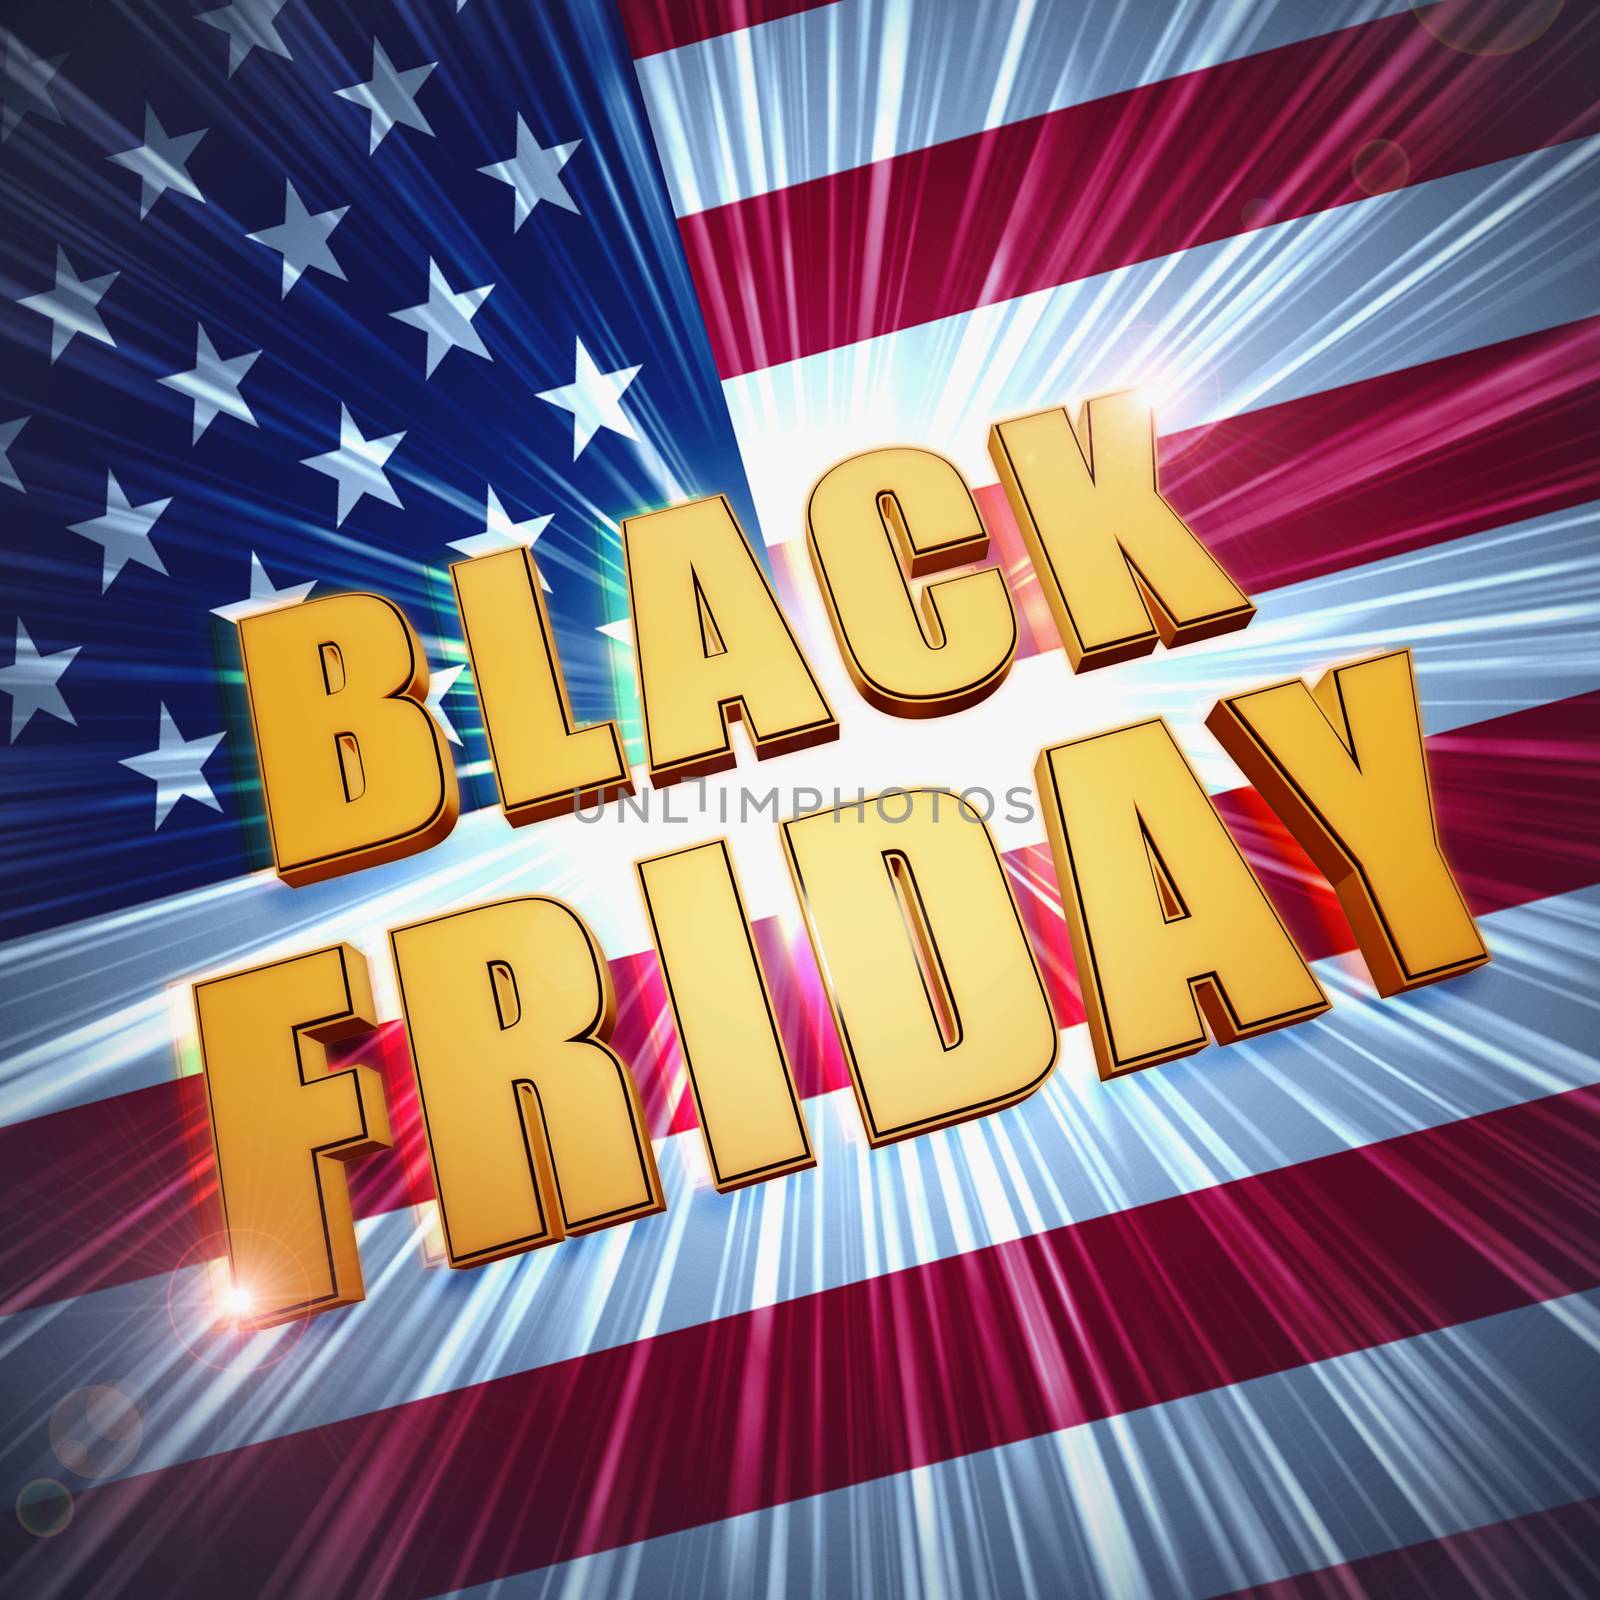 black friday - text in 3d golden letters with rays and shining USA flag, business holiday concept banner